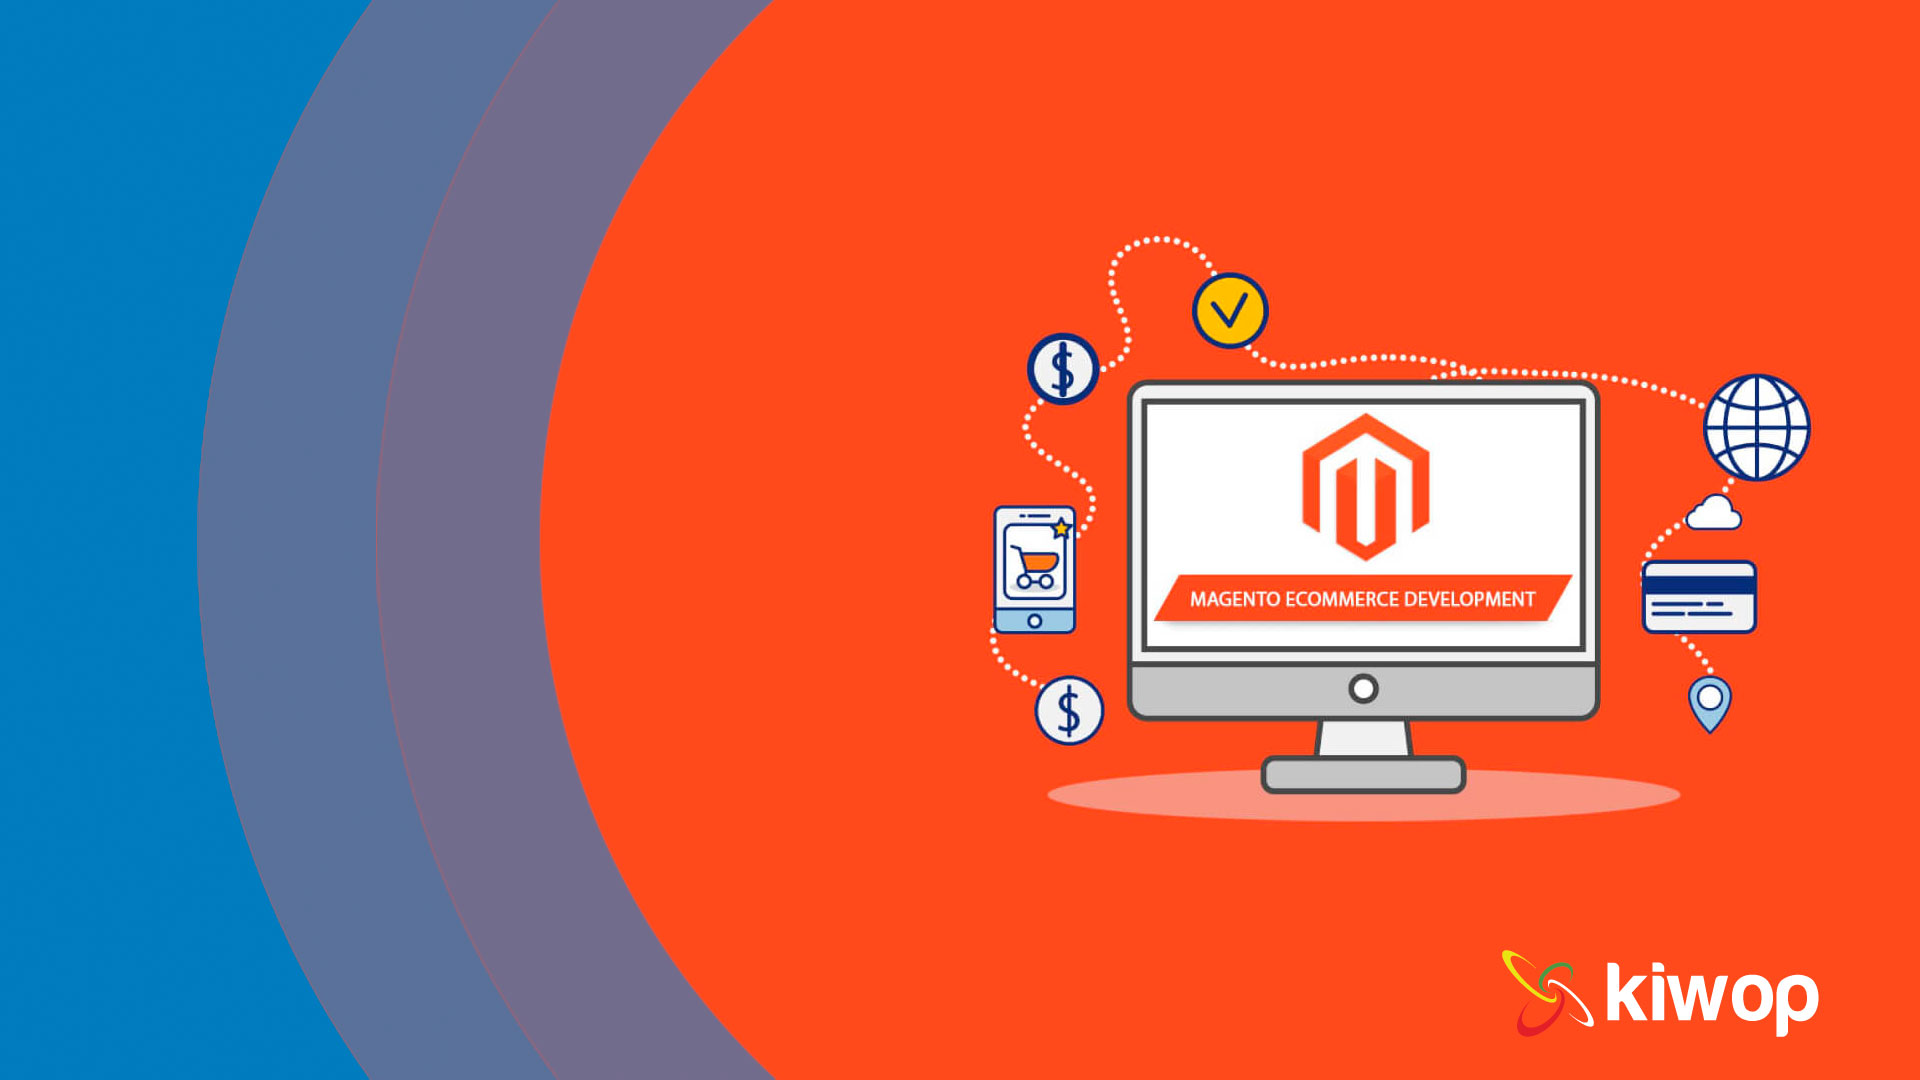 Magento: when, why and which version to choose